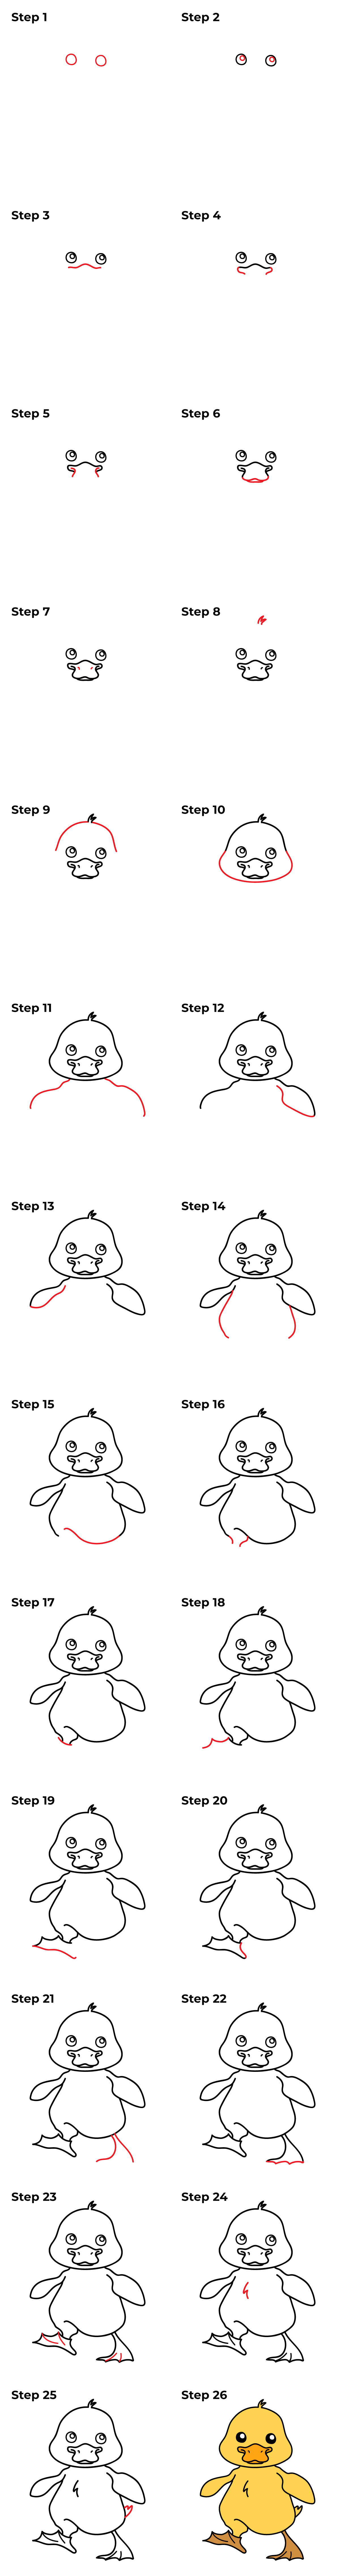 How to Draw a Cute Duck - Printable Tutorial